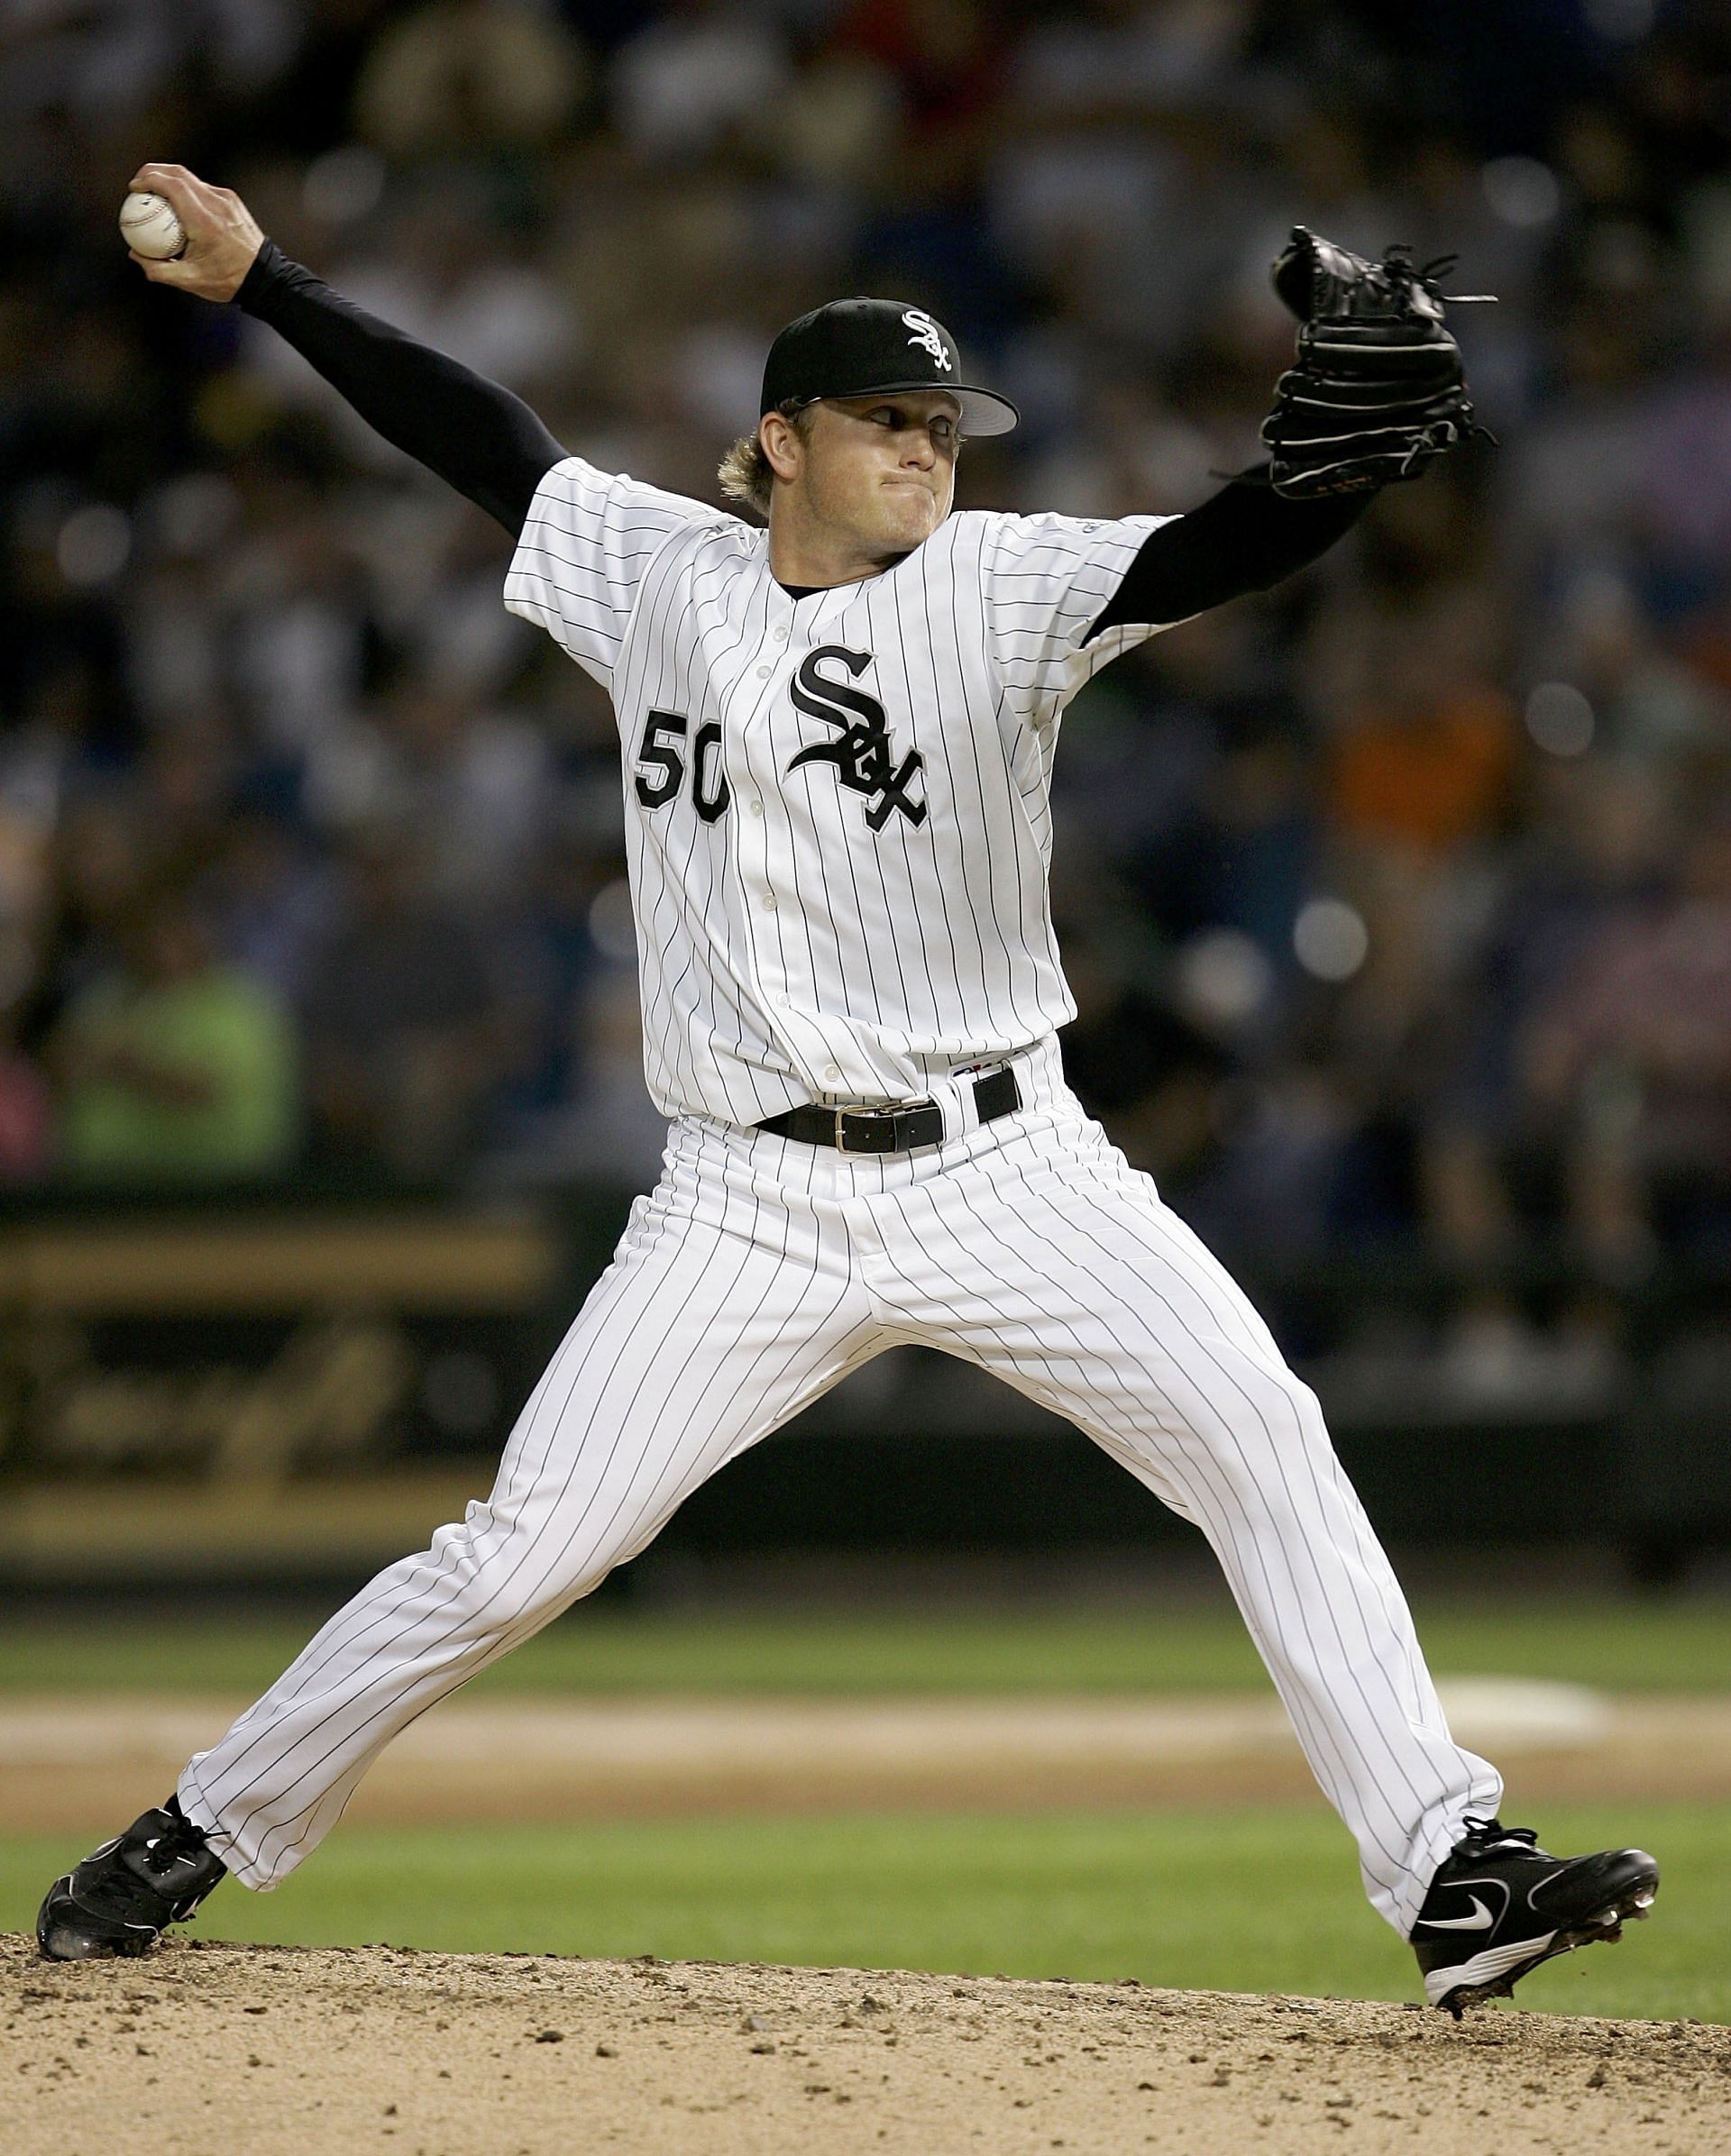 Sean Tracey #50 of the Chicago White Sox pitches in his Major League debut in the 8th inning against the Detroit Tigers on June 8, 2006 at U.S. Cellular Field in Chicago, Illinois.